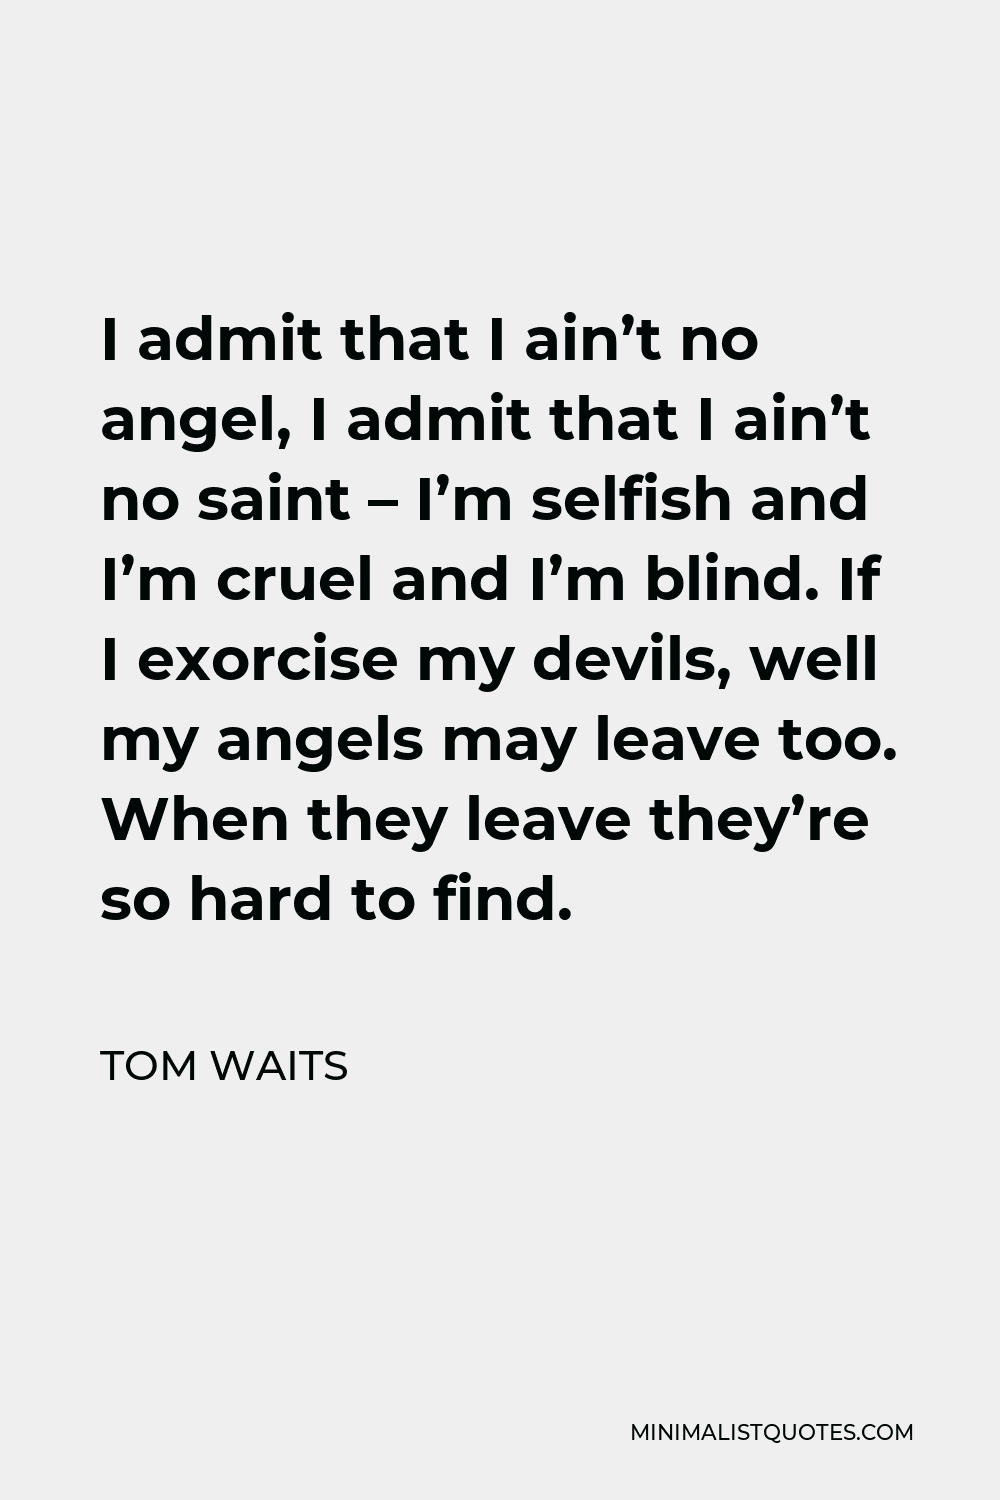 Tom Waits Quote - I admit that I ain’t no angel, I admit that I ain’t no saint – I’m selfish and I’m cruel and I’m blind. If I exorcise my devils, well my angels may leave too. When they leave they’re so hard to find.